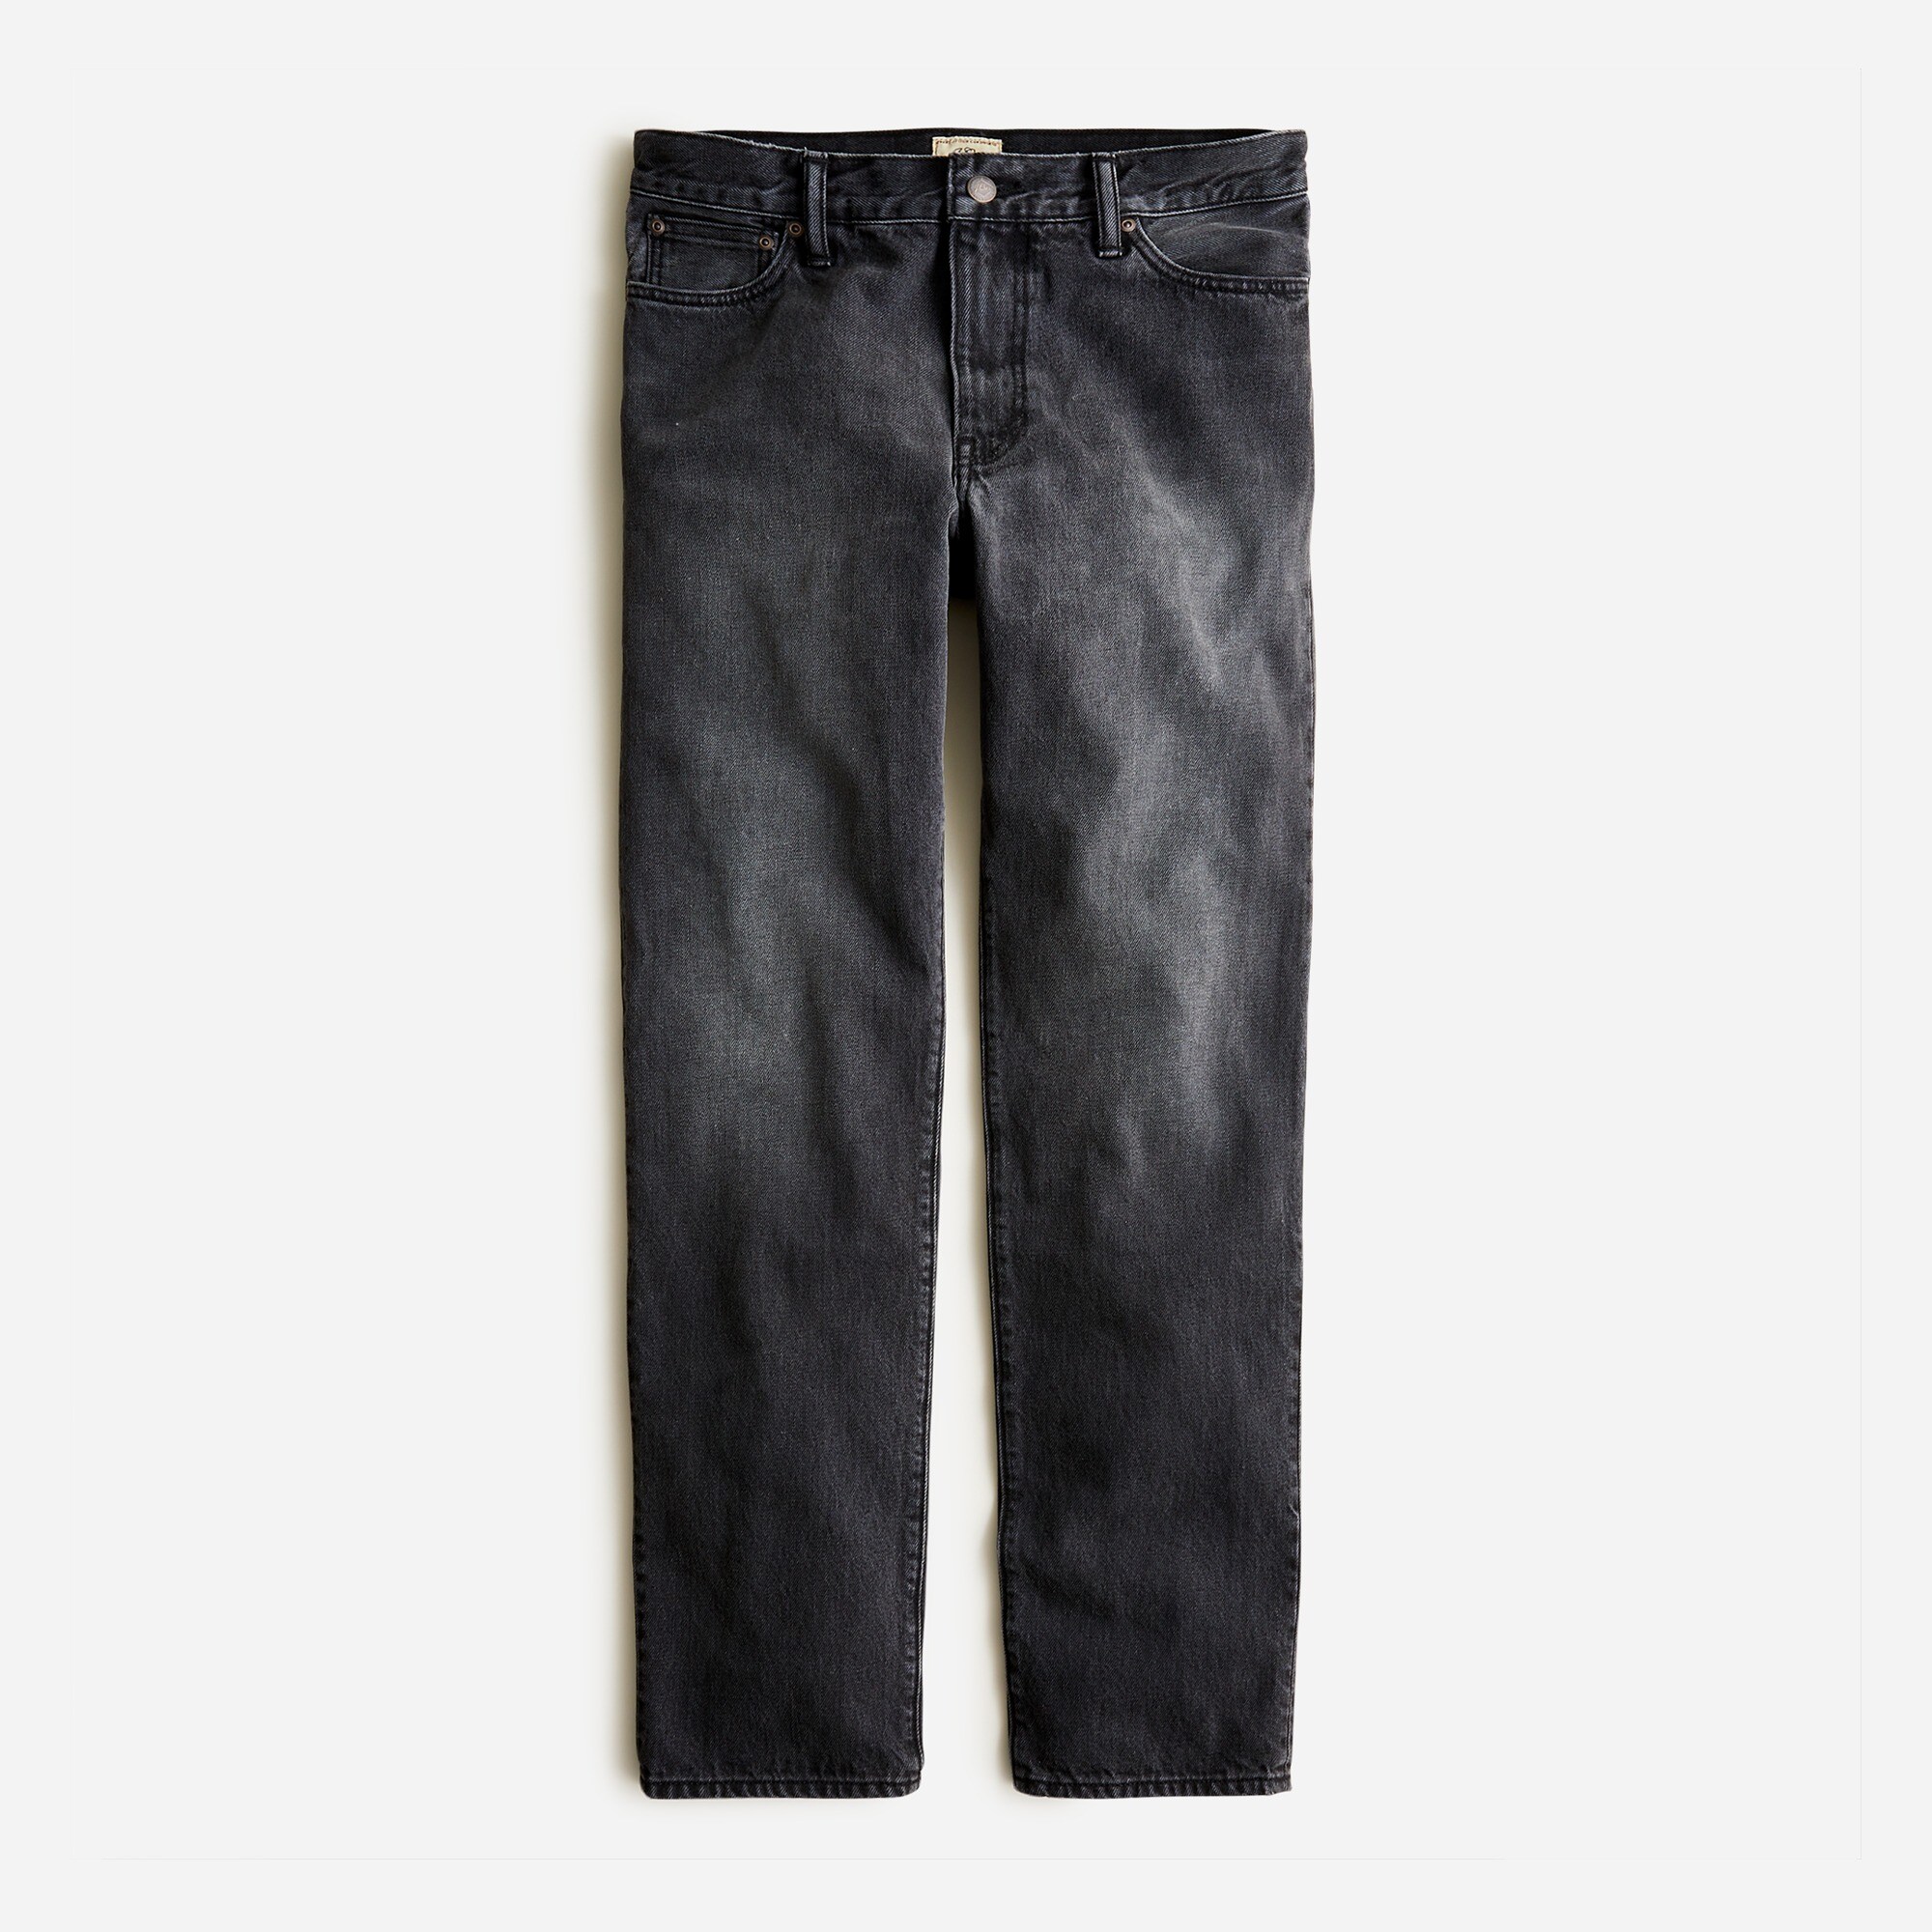 mens Classic Straight-fit jean in deep grey wash